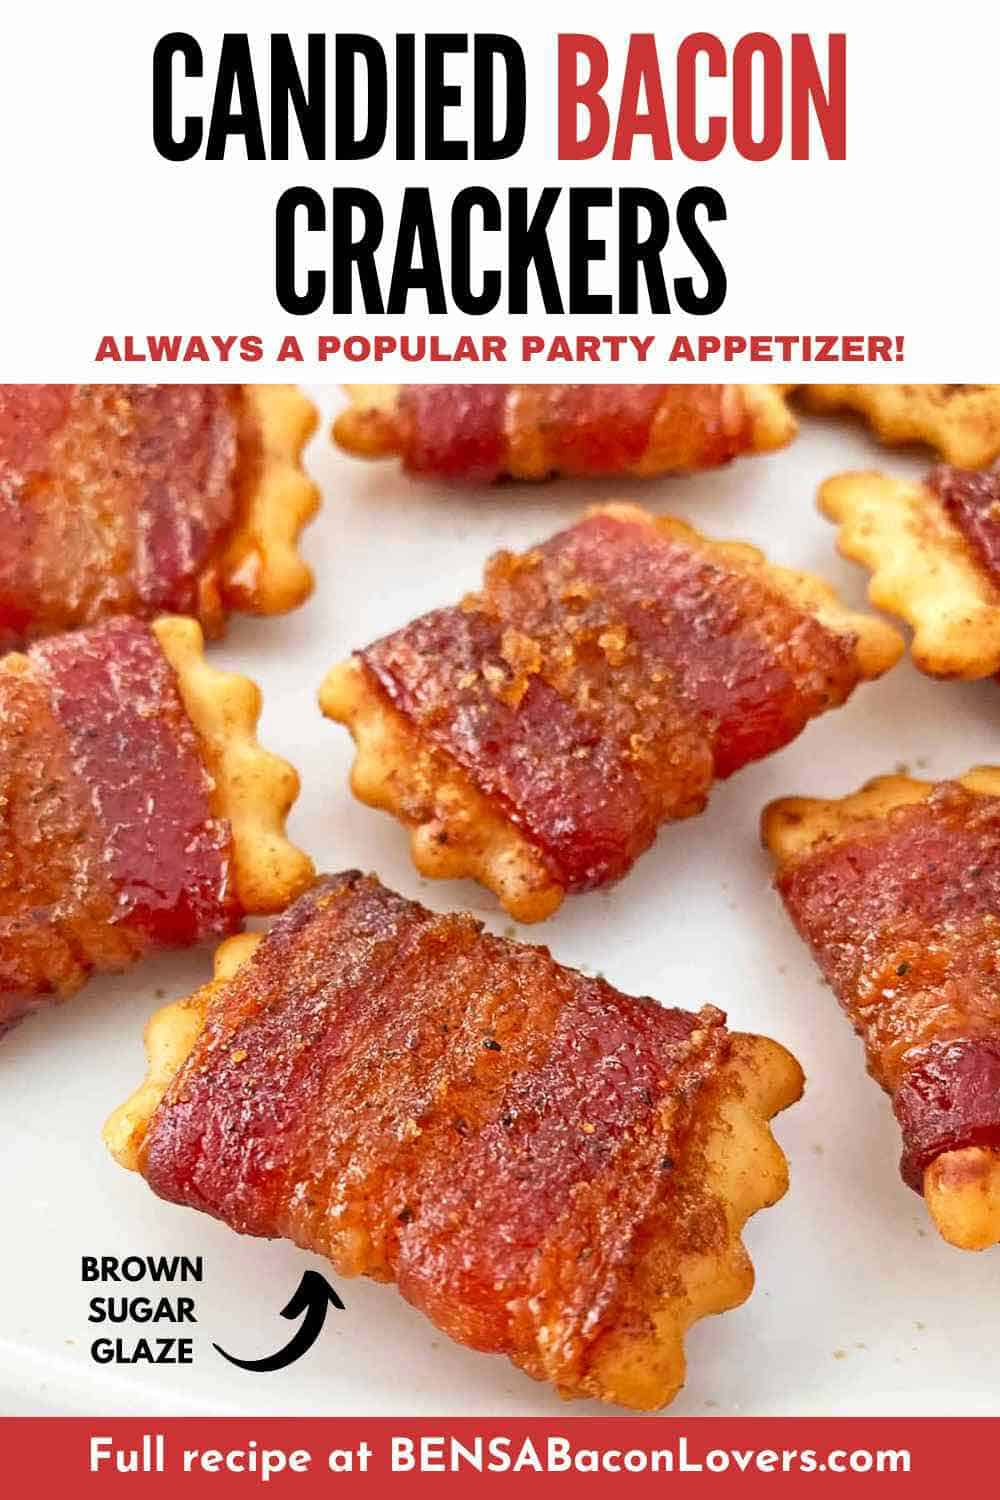 Ten candied bacon crackers ready to serve as party appetizers.